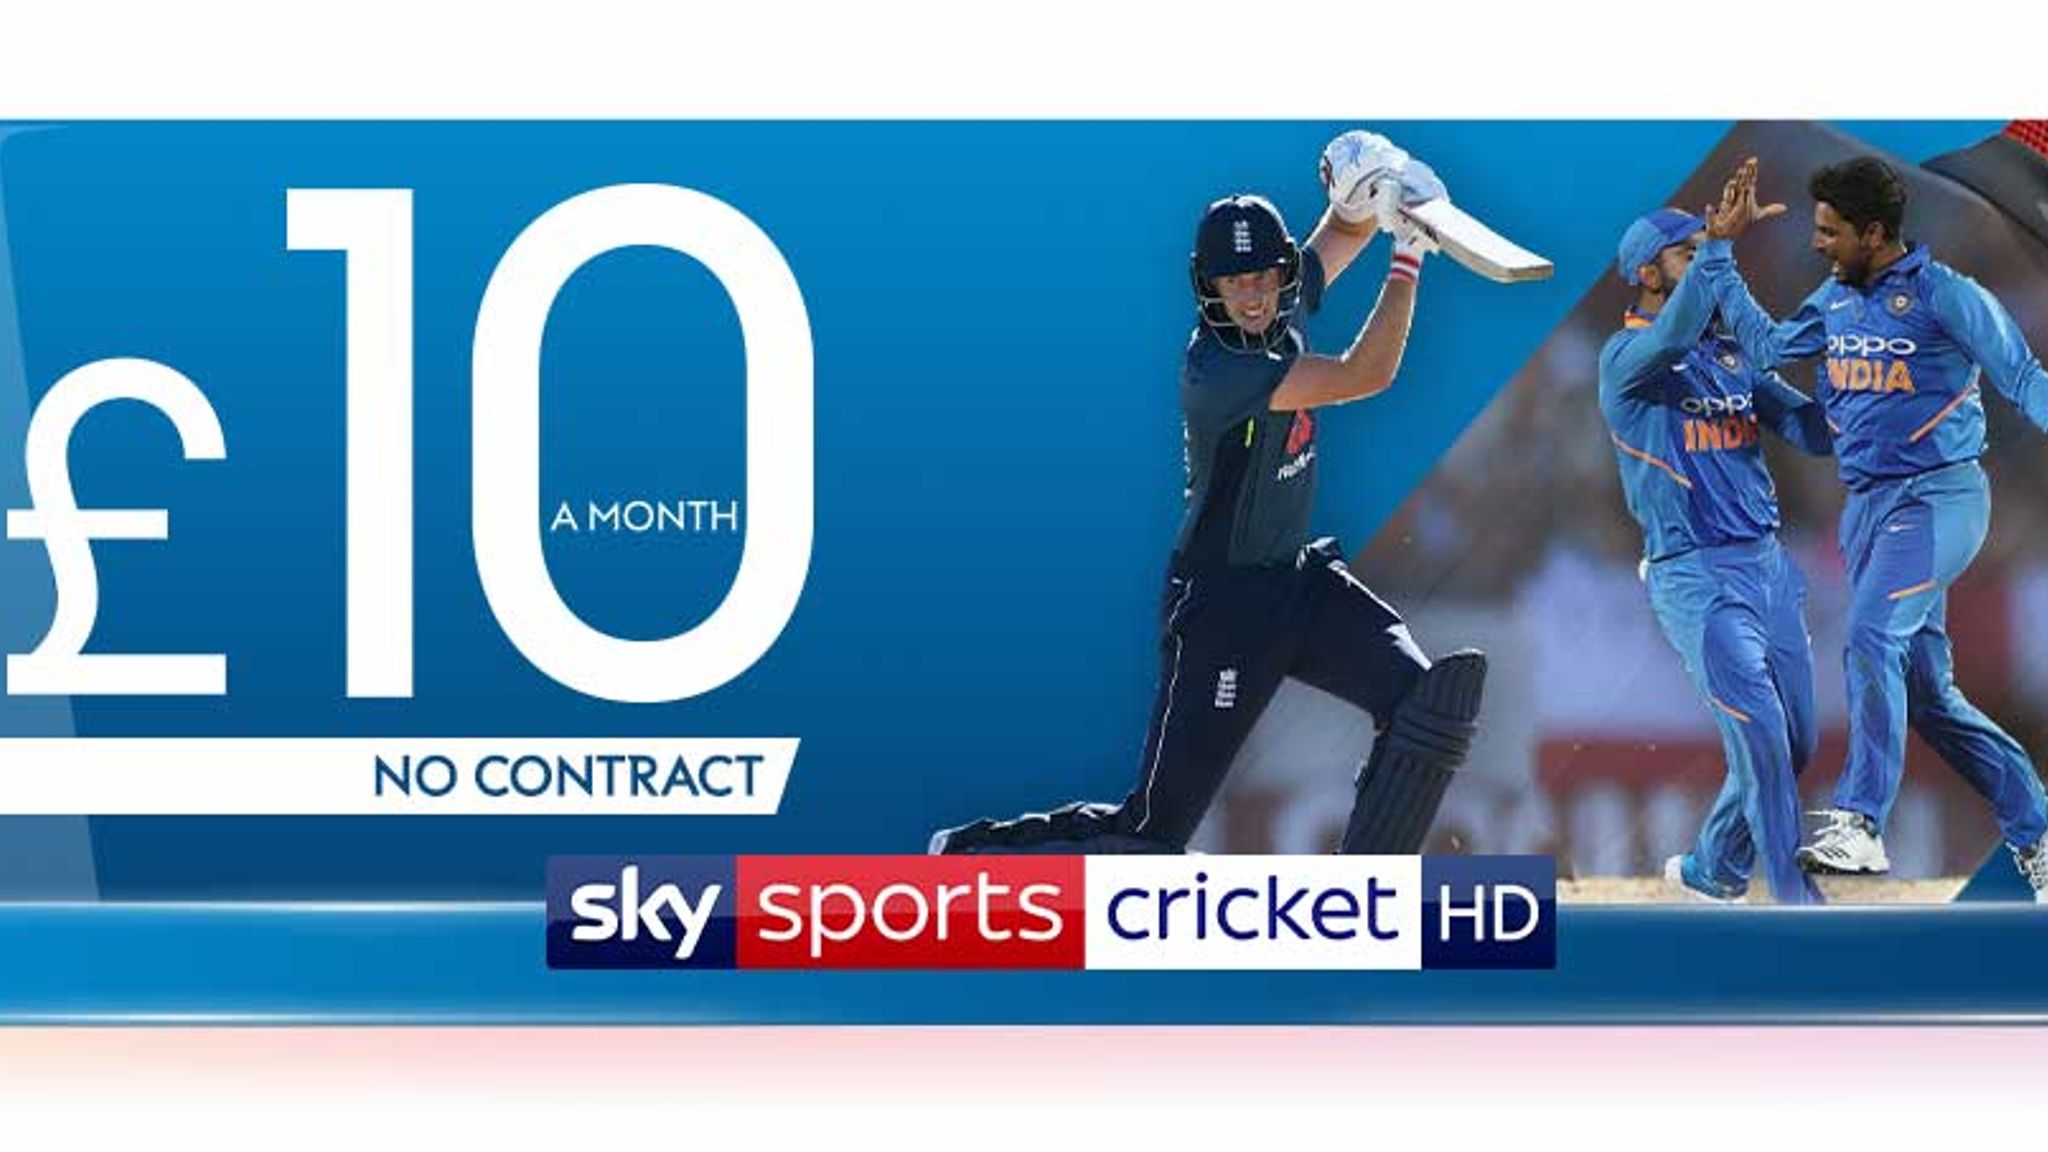 Cricket World Cup Get Sky Sports Cricket HD for just £10 a month Cricket News Sky Sports